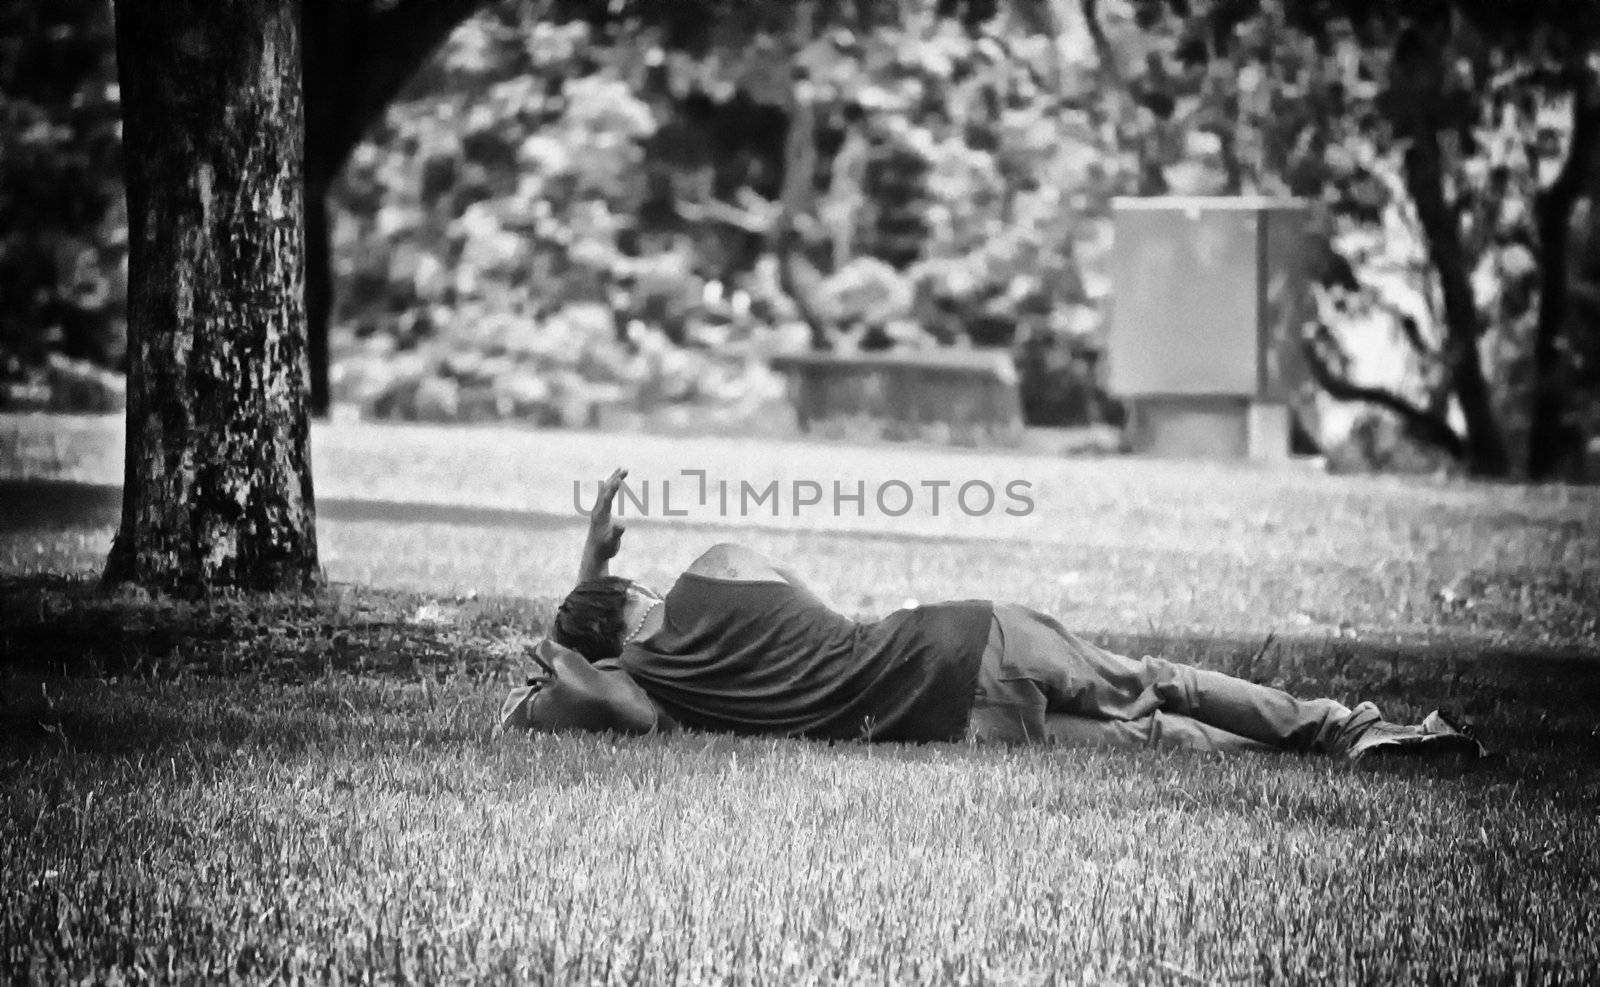 While I was in Darwin Australia I took this as part of a "homeless" series